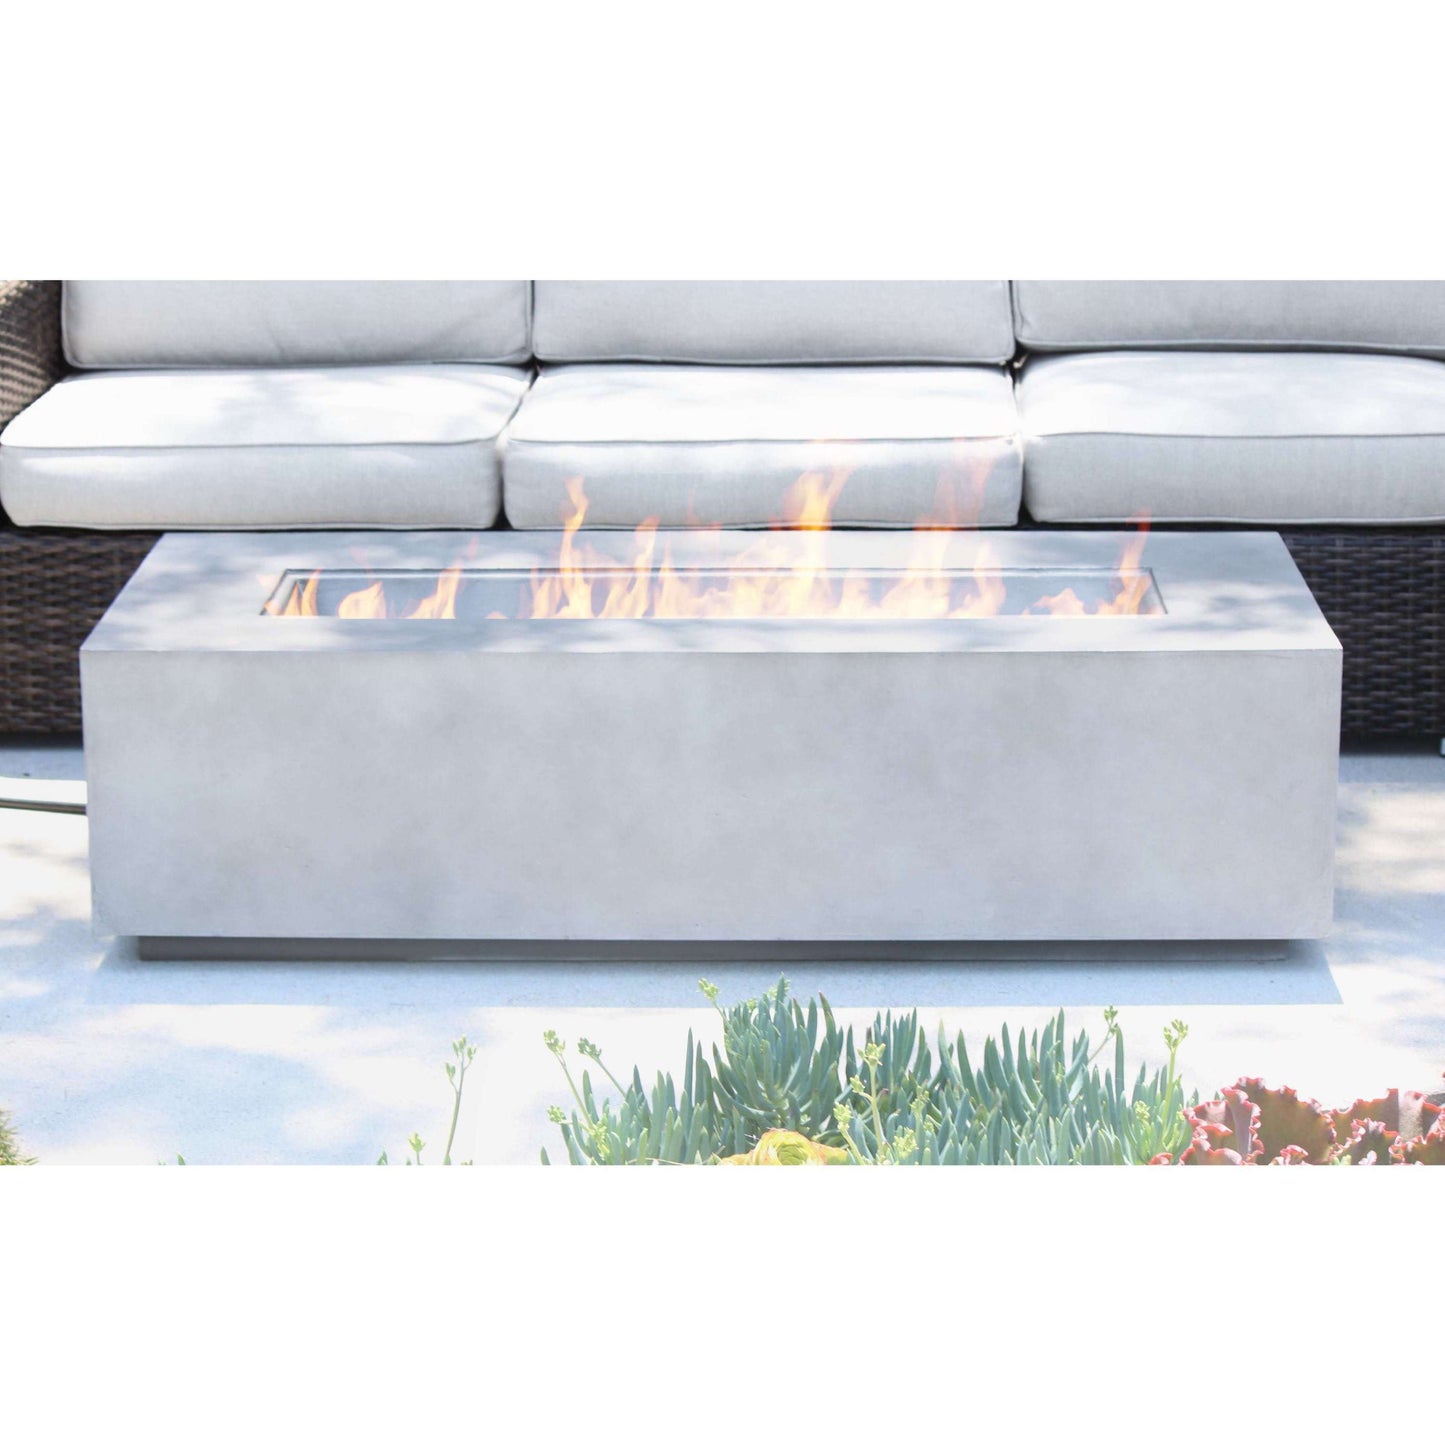 56-inch Modern Concrete Propane Outdoor Fire Pit Table by Living Source International